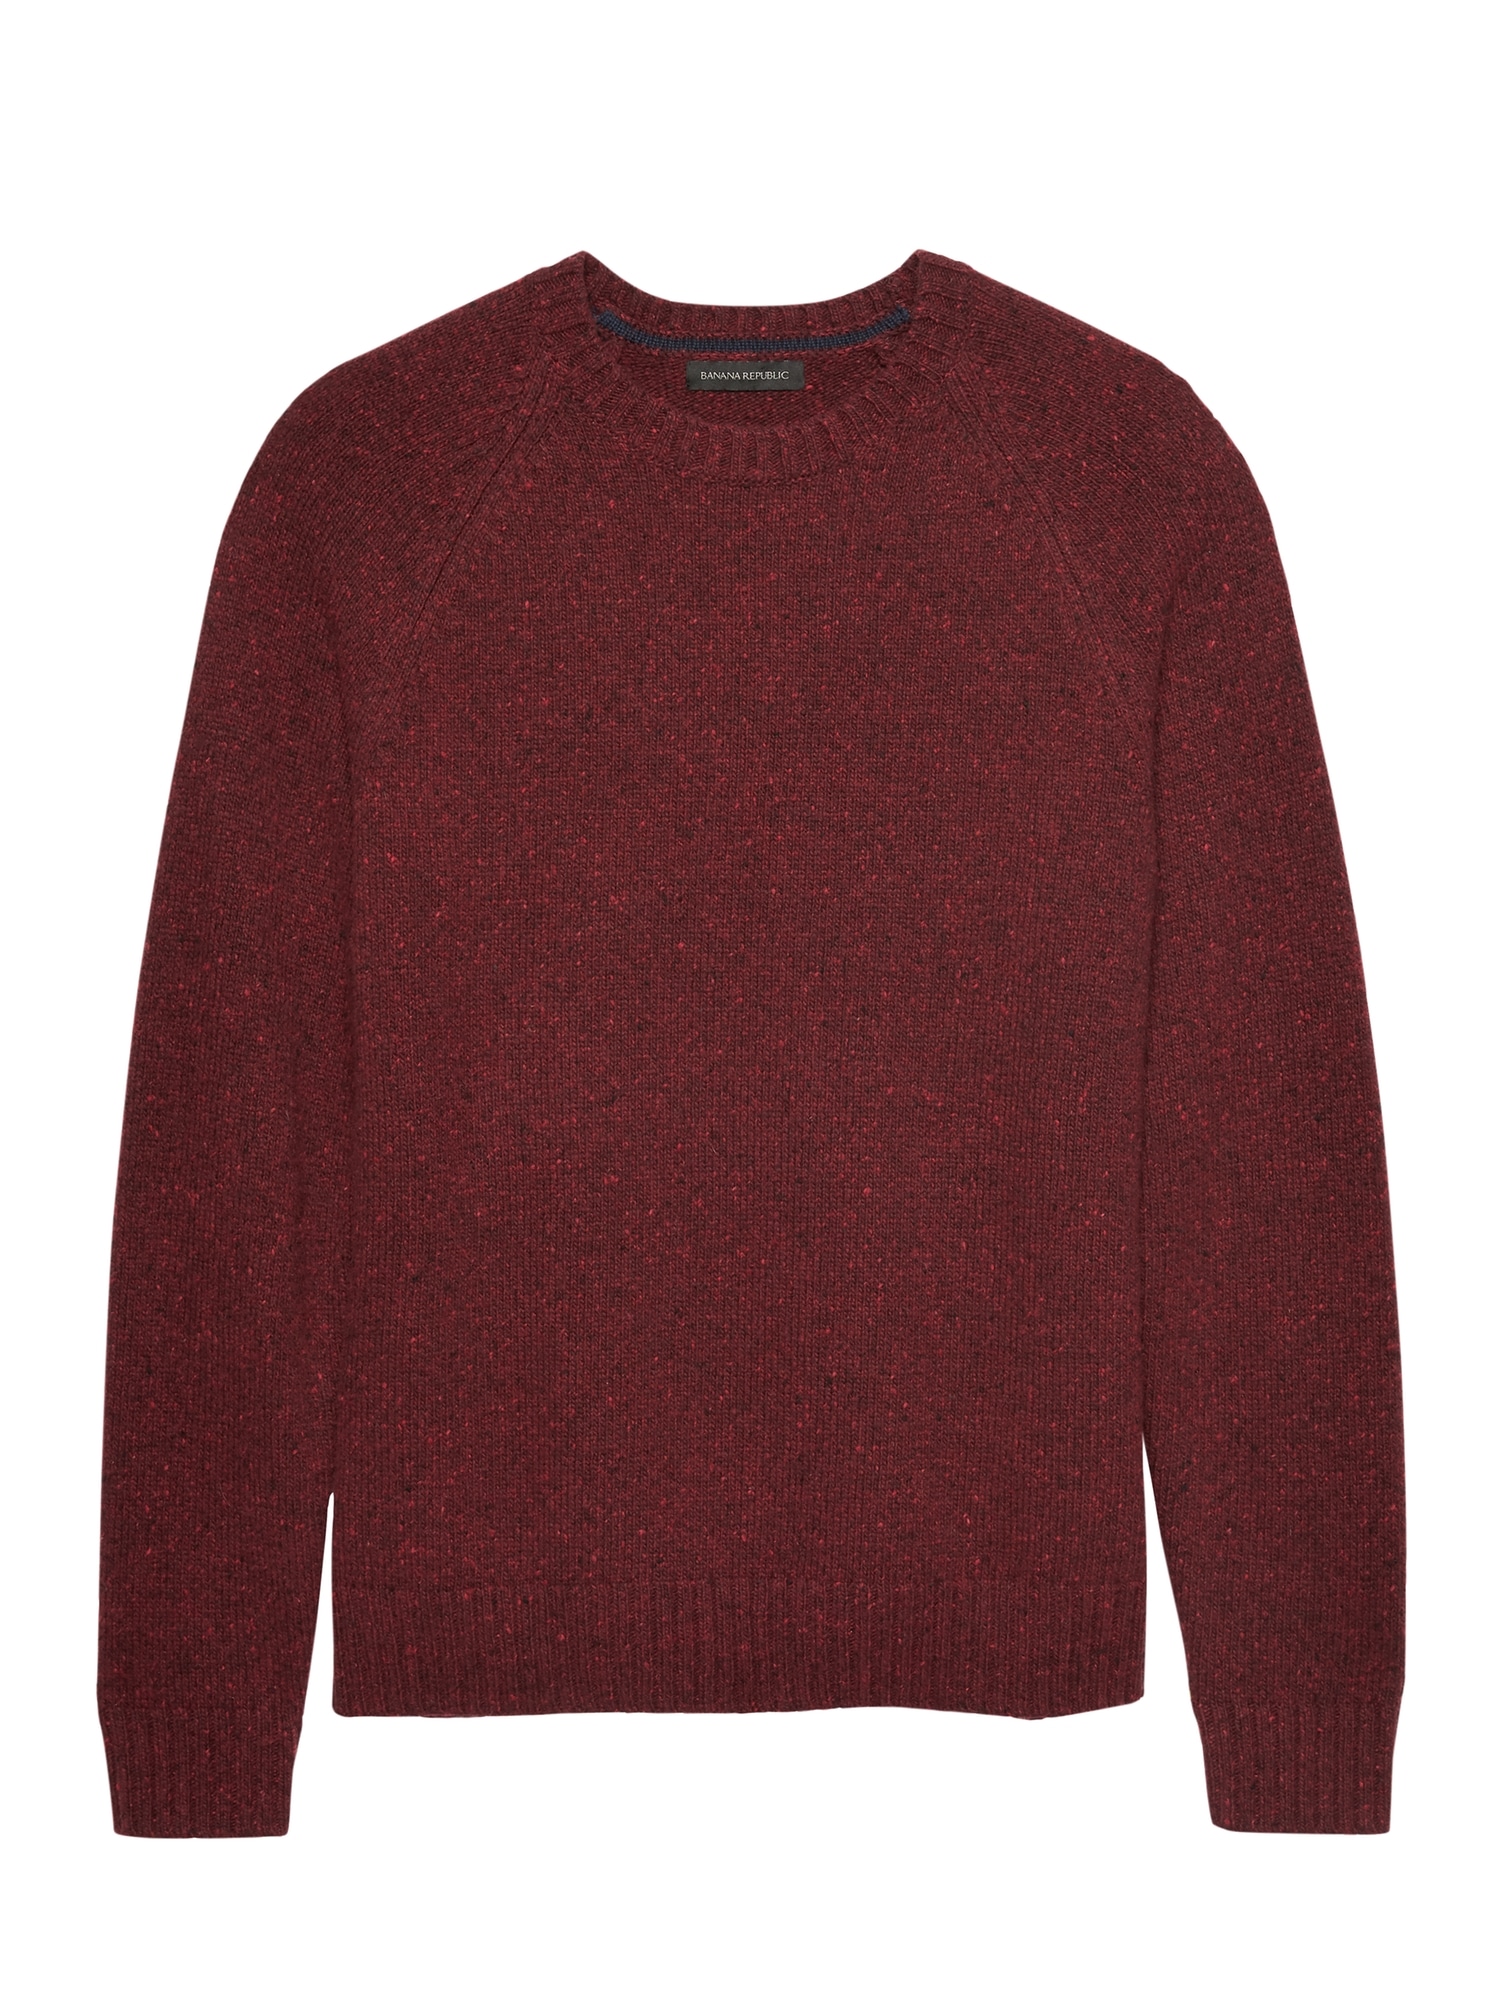 Donegal Crew-Neck Sweater